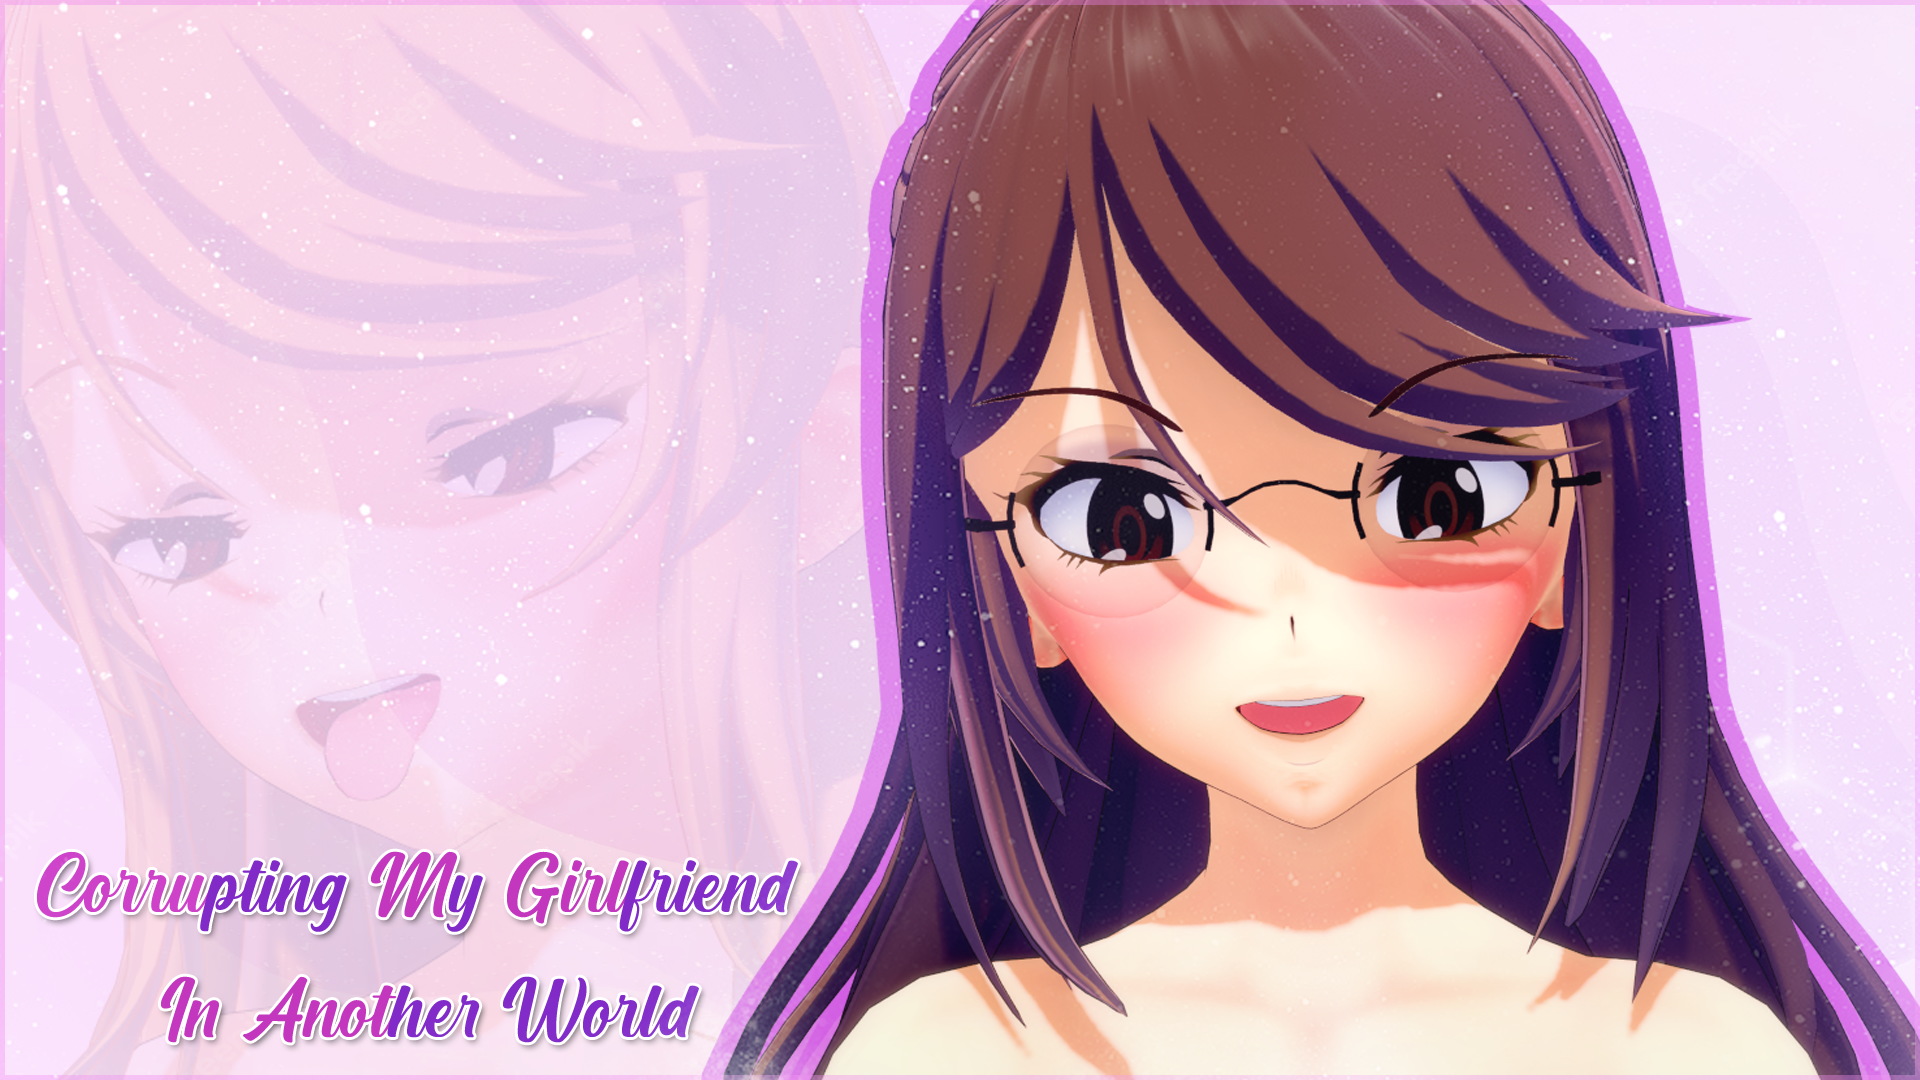 Download Free Hentai Game Porn Games Corrupting My Girlfriend in Another World (v0.2.2)